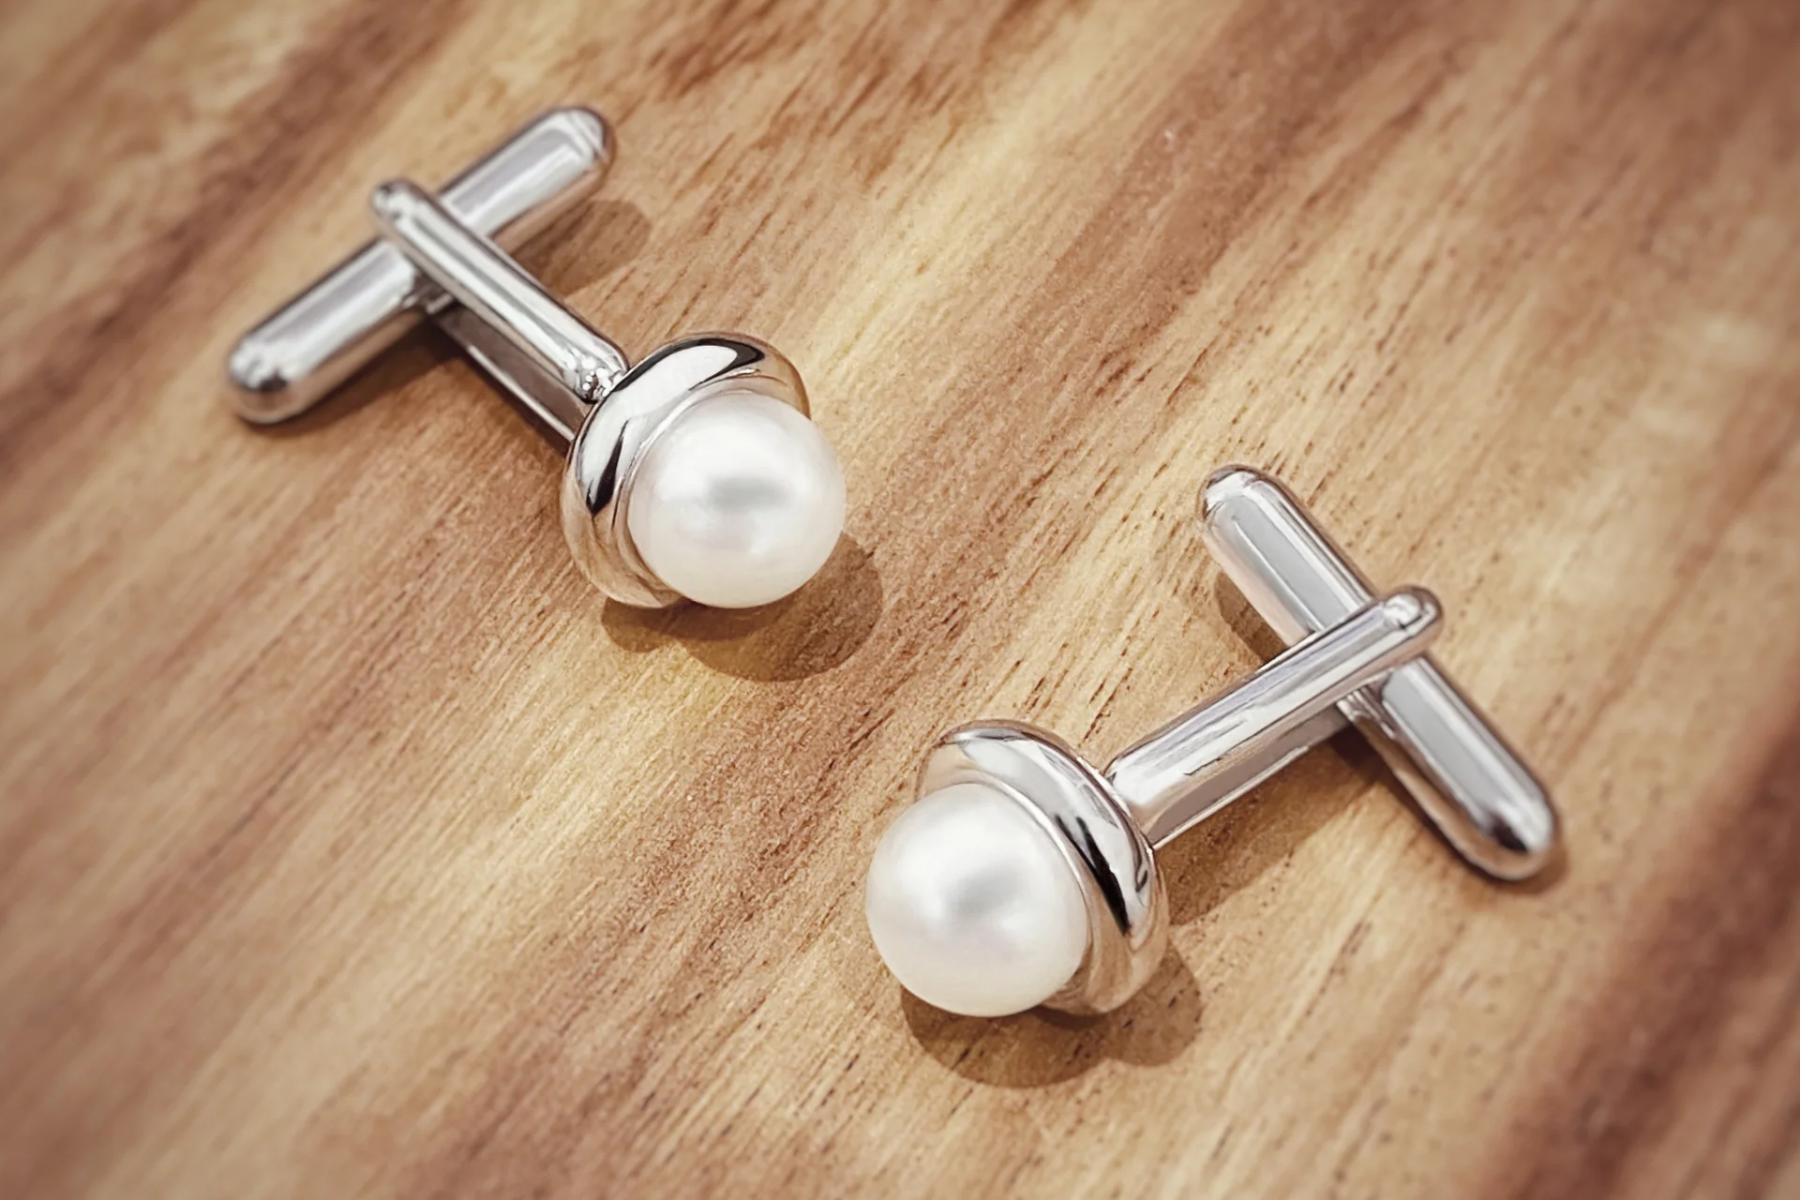 A pair of pearl cufflinks are displayed on a wooden table